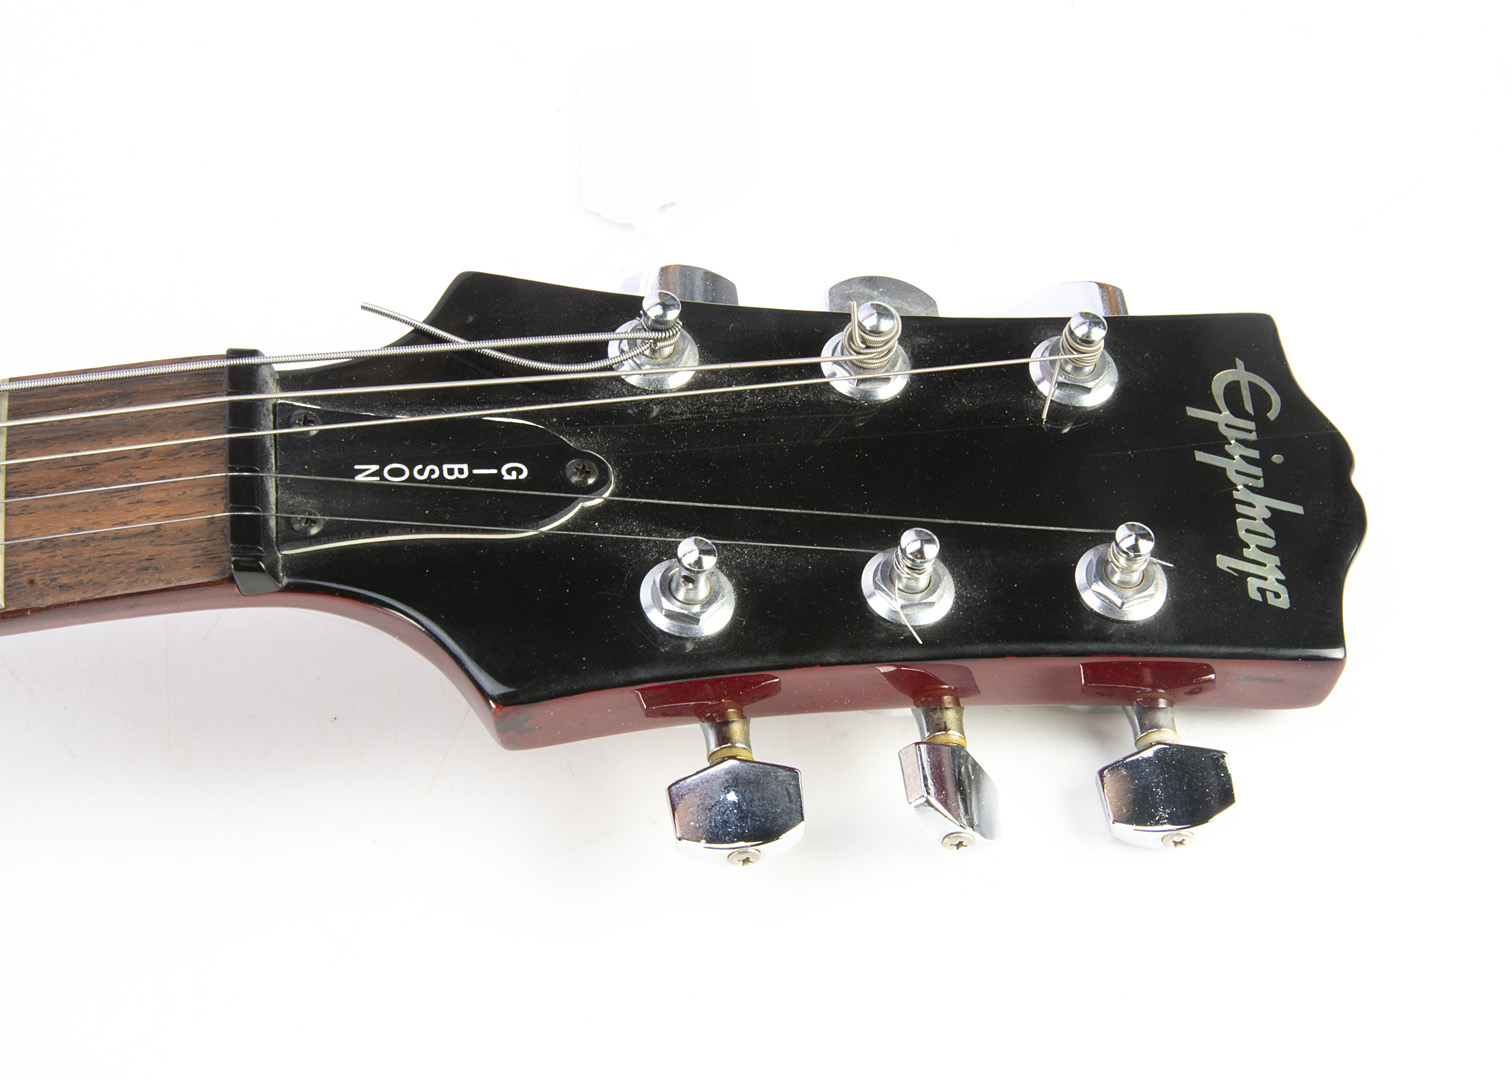 Epiphone Electric Guitar, an Epiphone Electric Guitar appears to be model SG G400, cherry s/n - Image 2 of 4